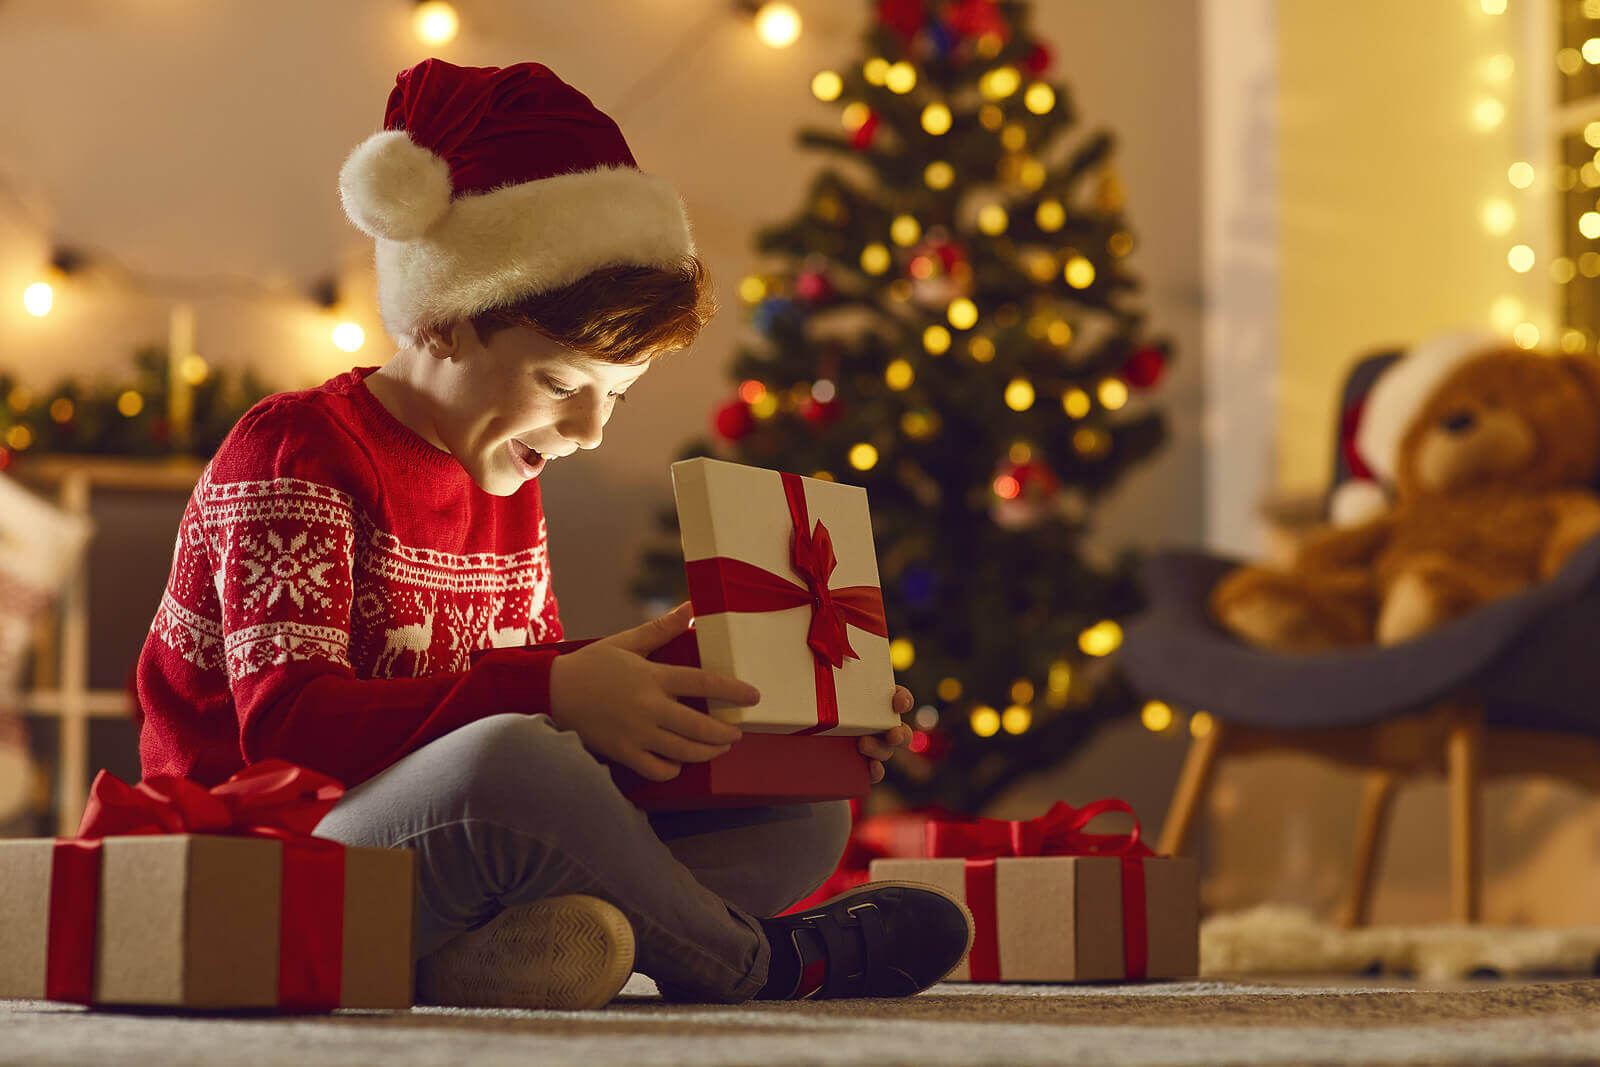 A young boy opening presents on Christmas morning.